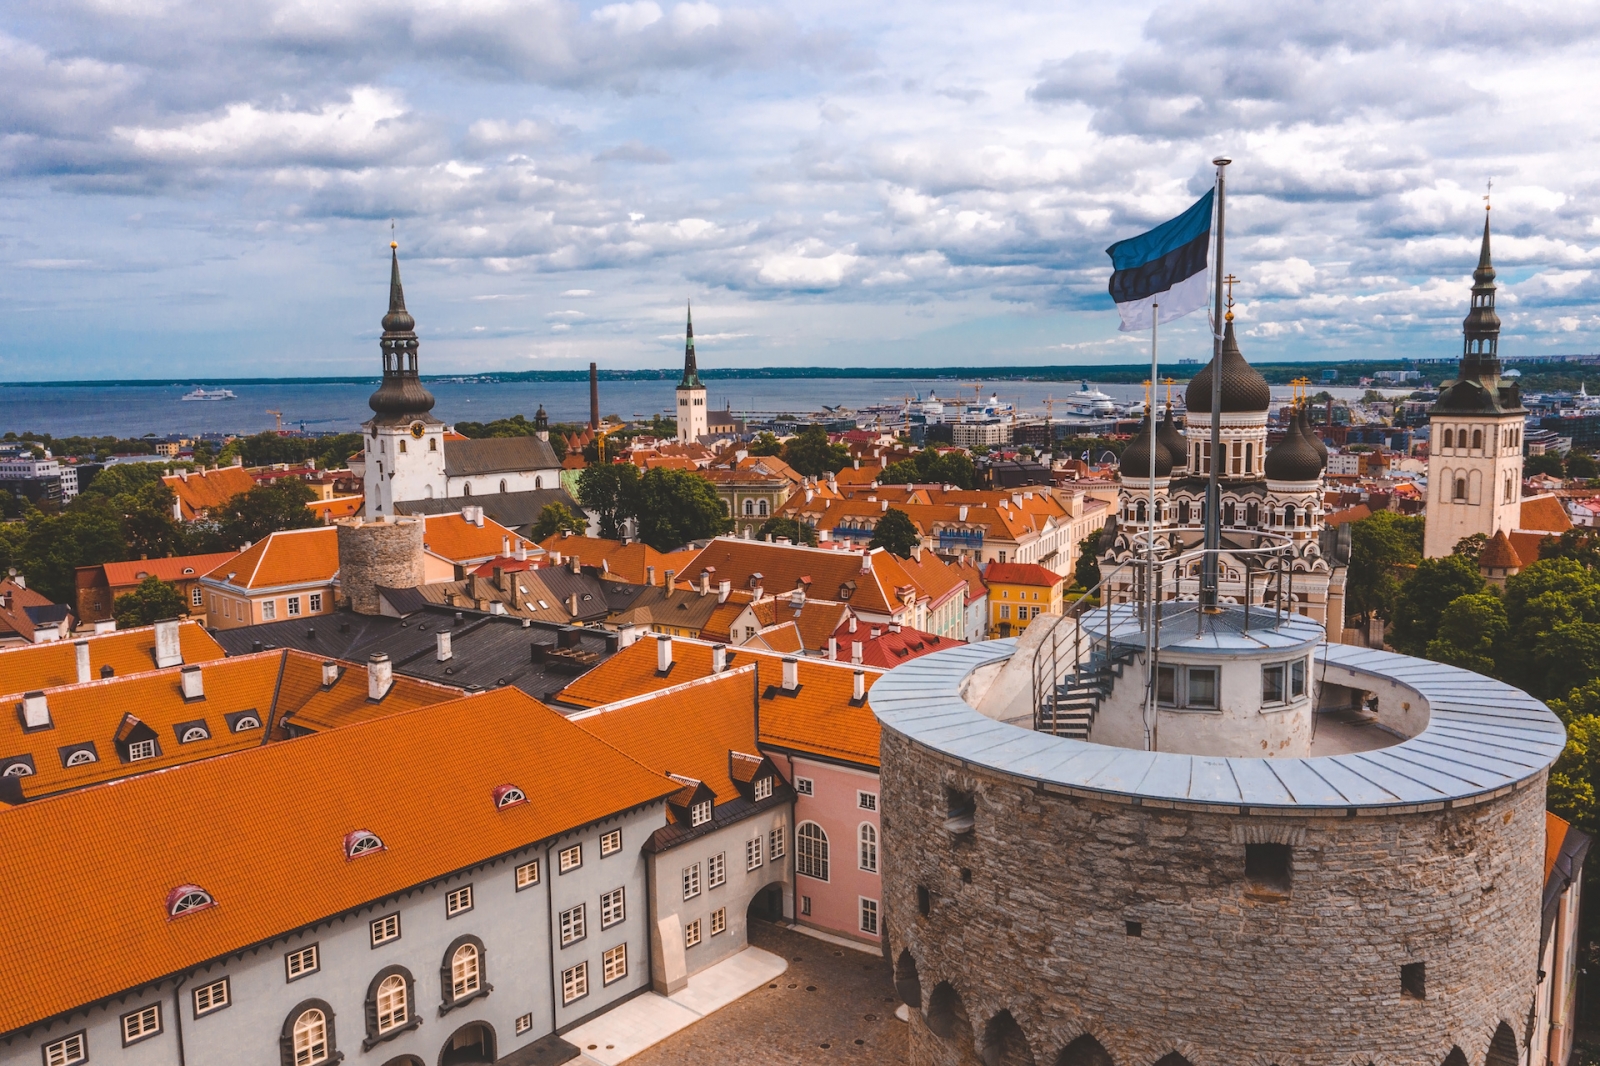 Close up view of the Estonian flag on top of the old medieval tower.